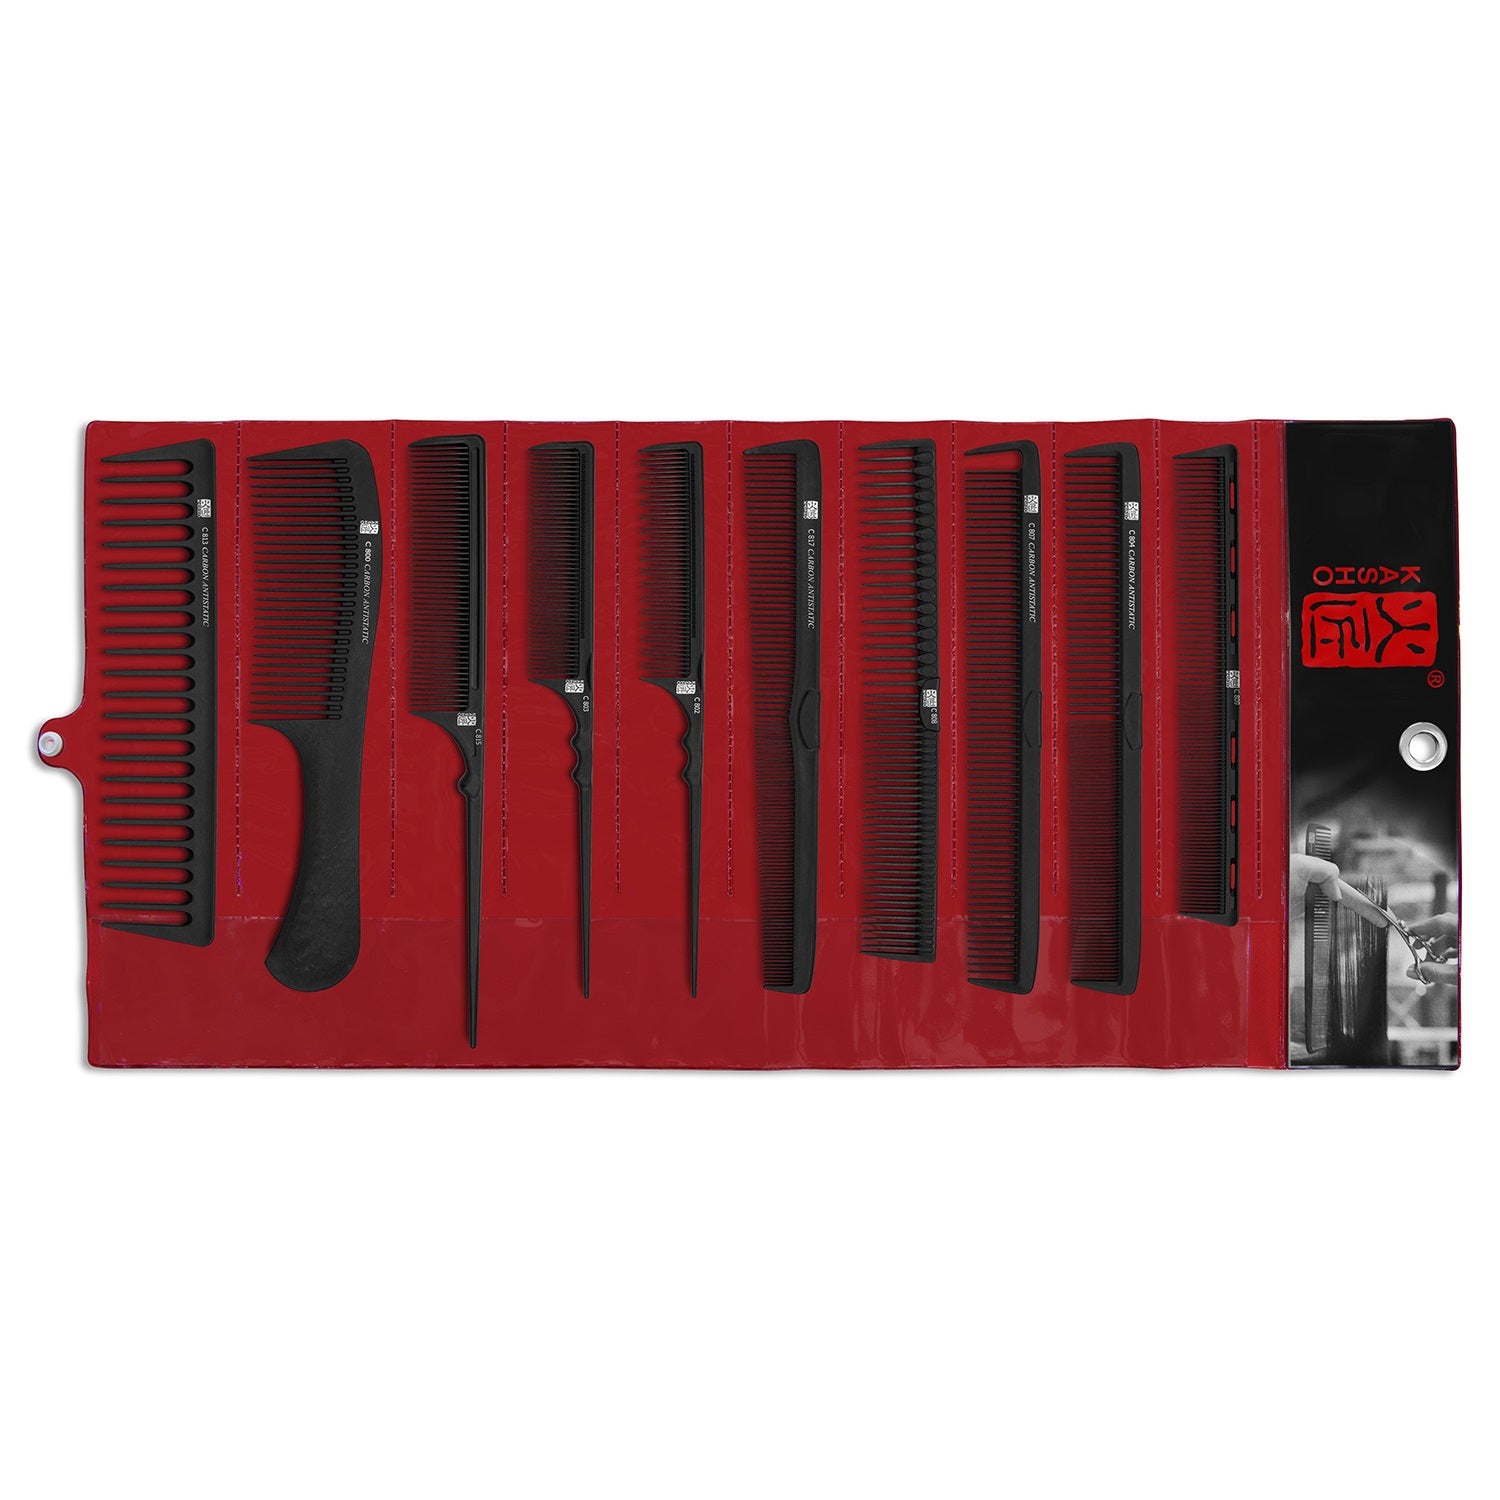 Kasho 10pc Comb Set with K-22 Roll